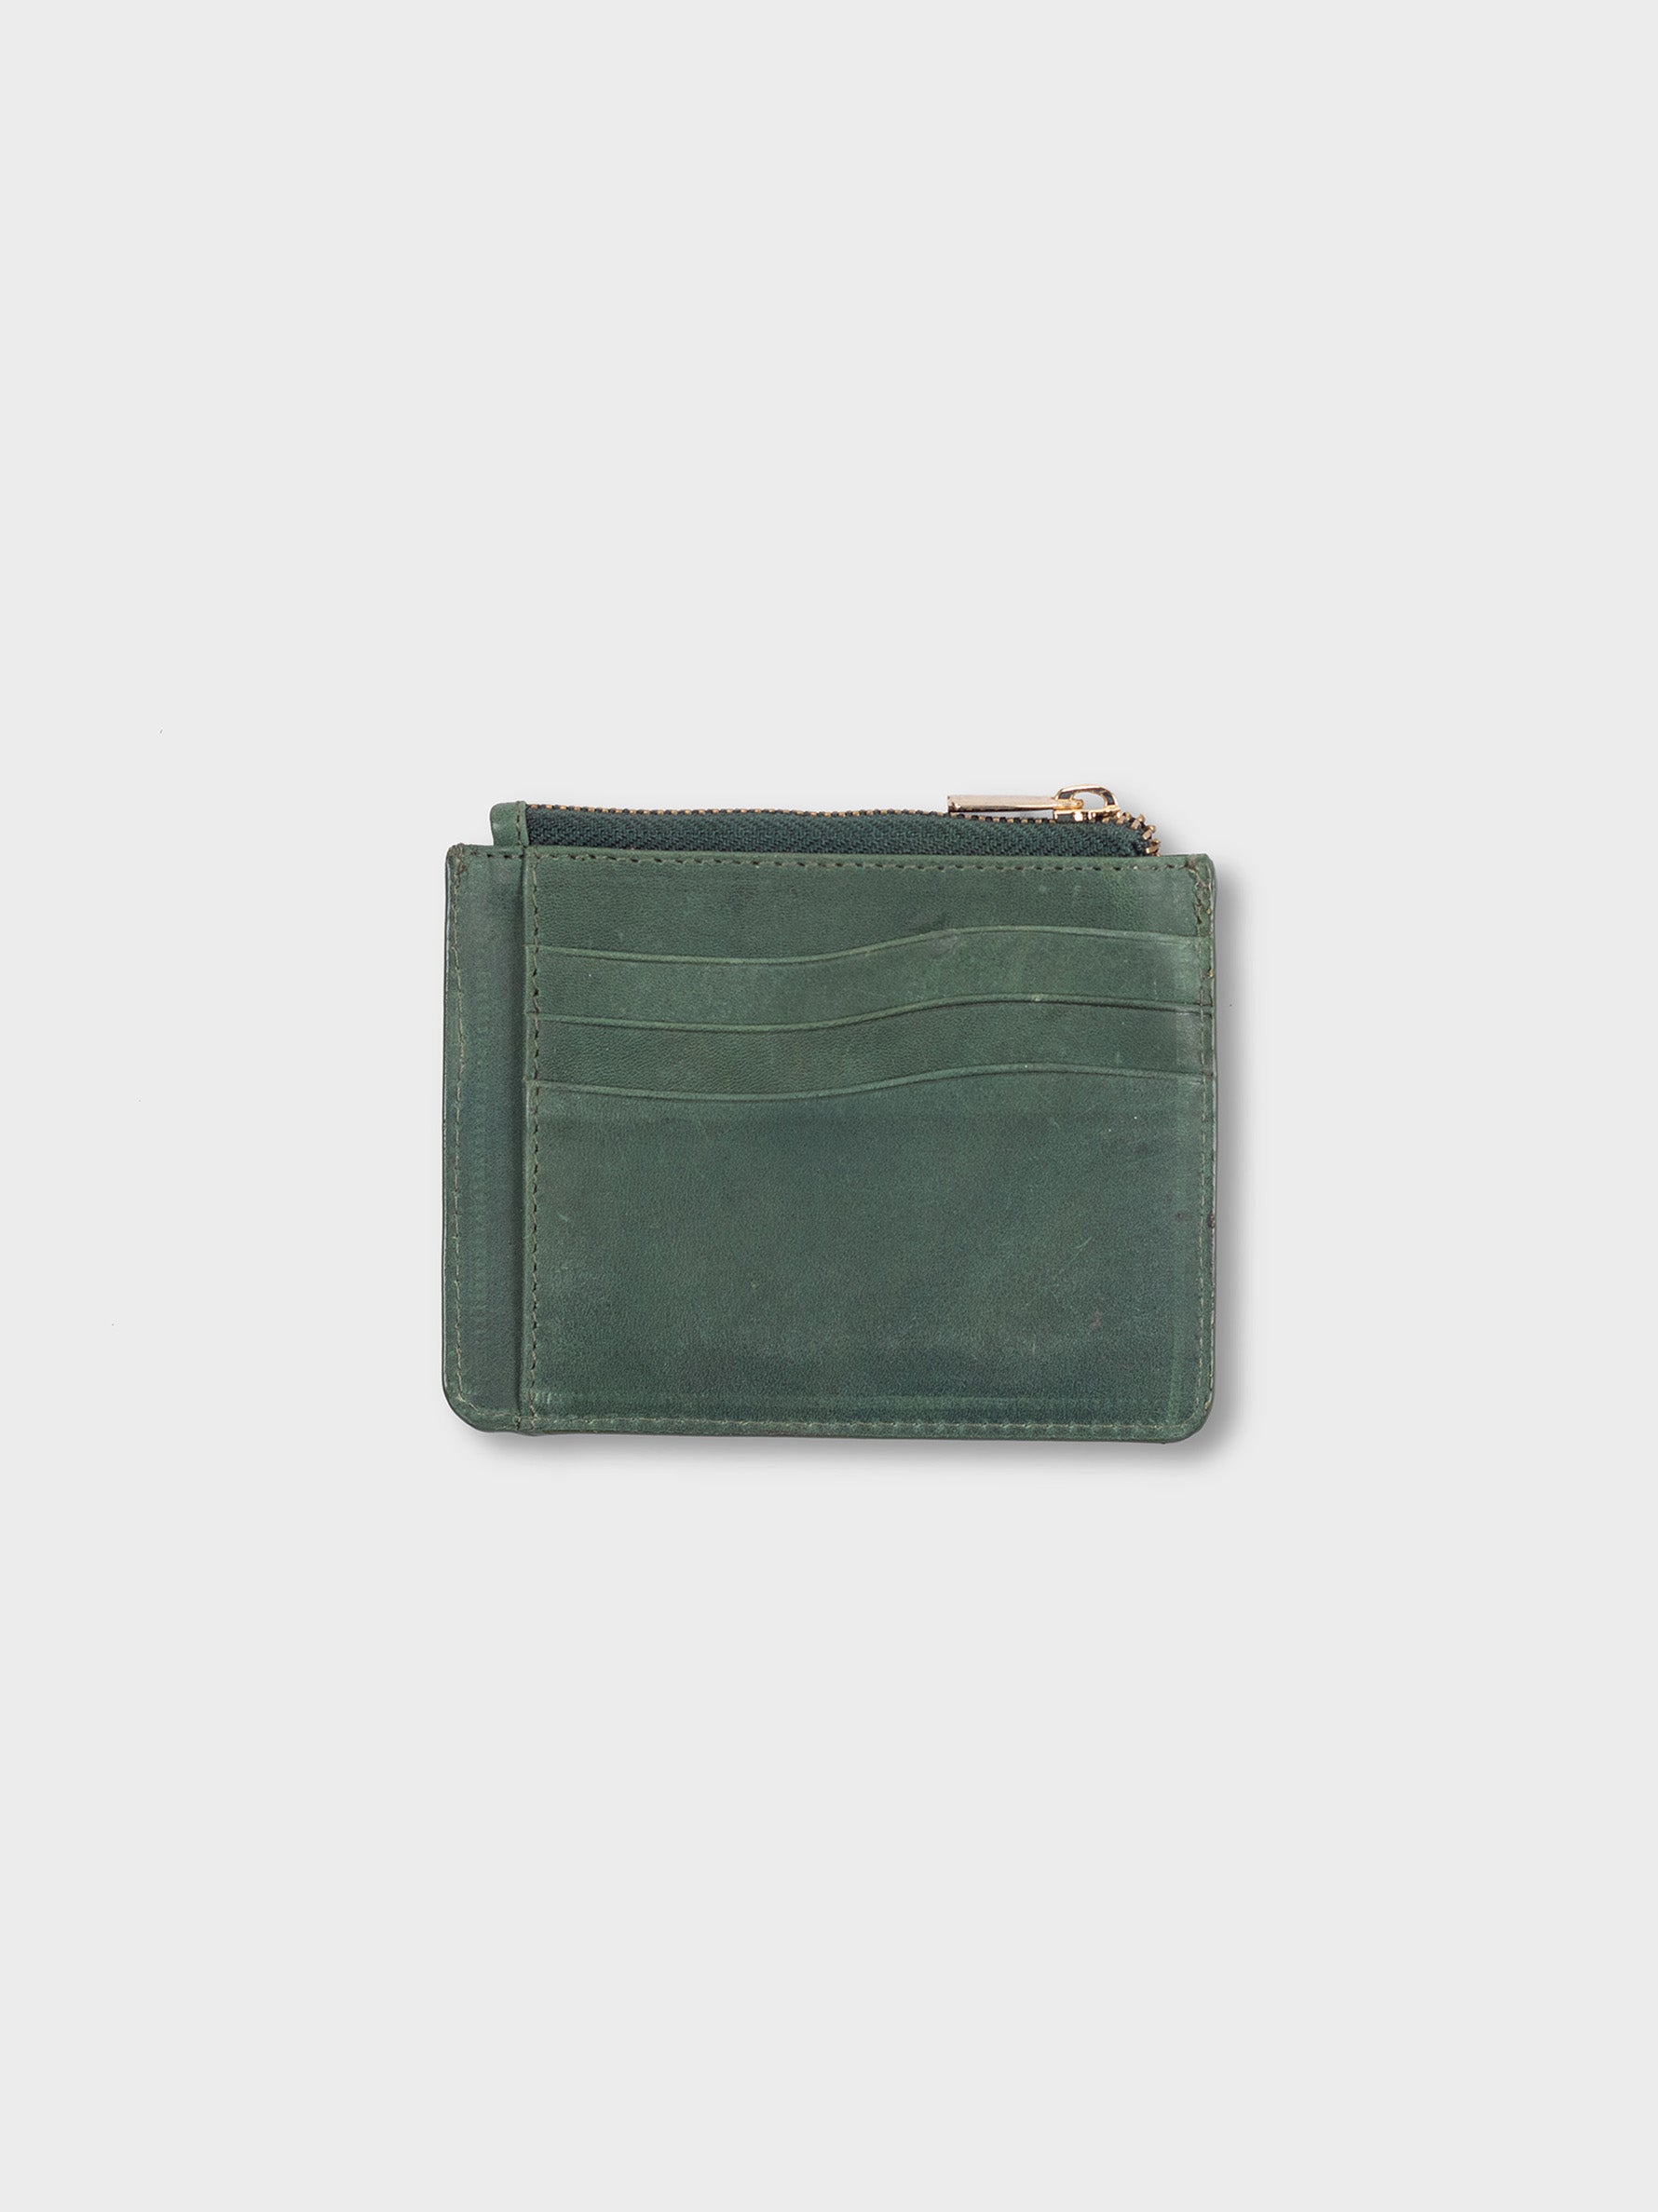 Premium Distressed Vegetable Tanned Leather Green Cardholder for Women Tan & Loom